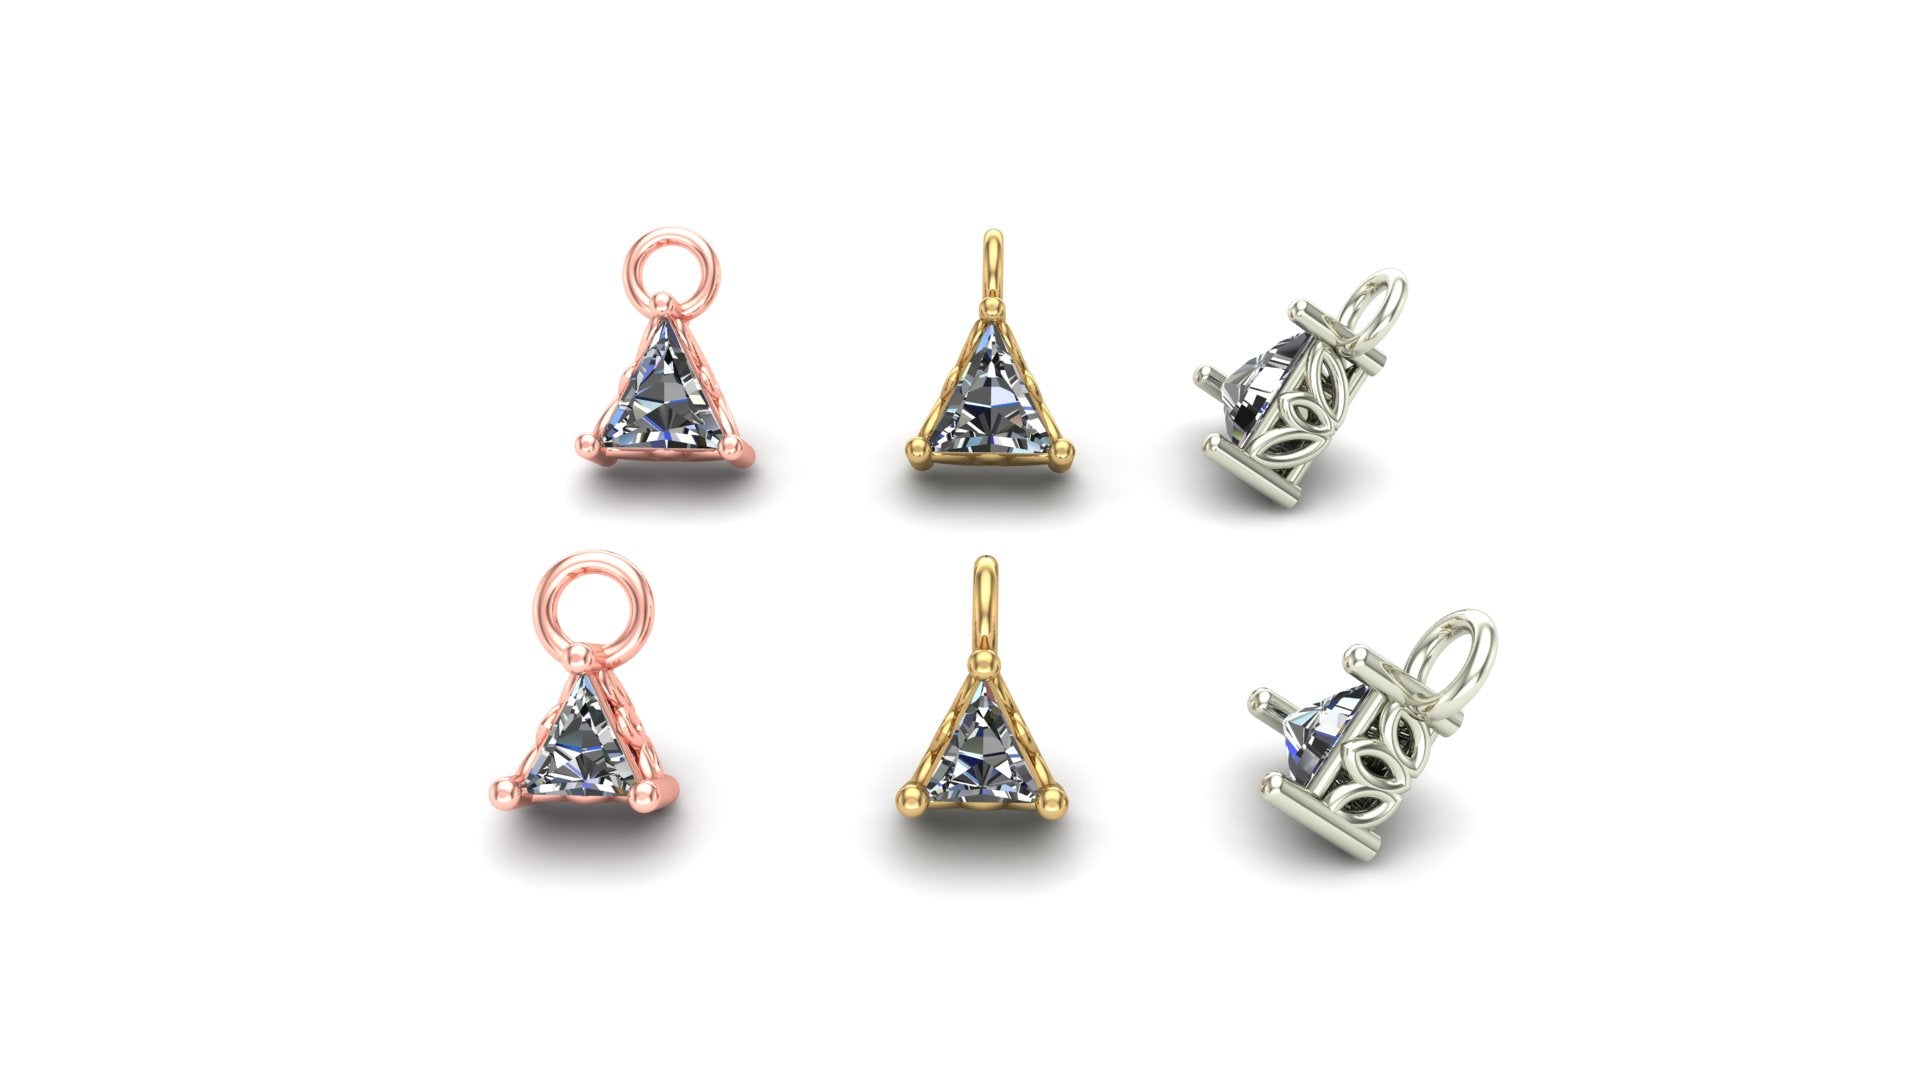 Triangle Prong Charm